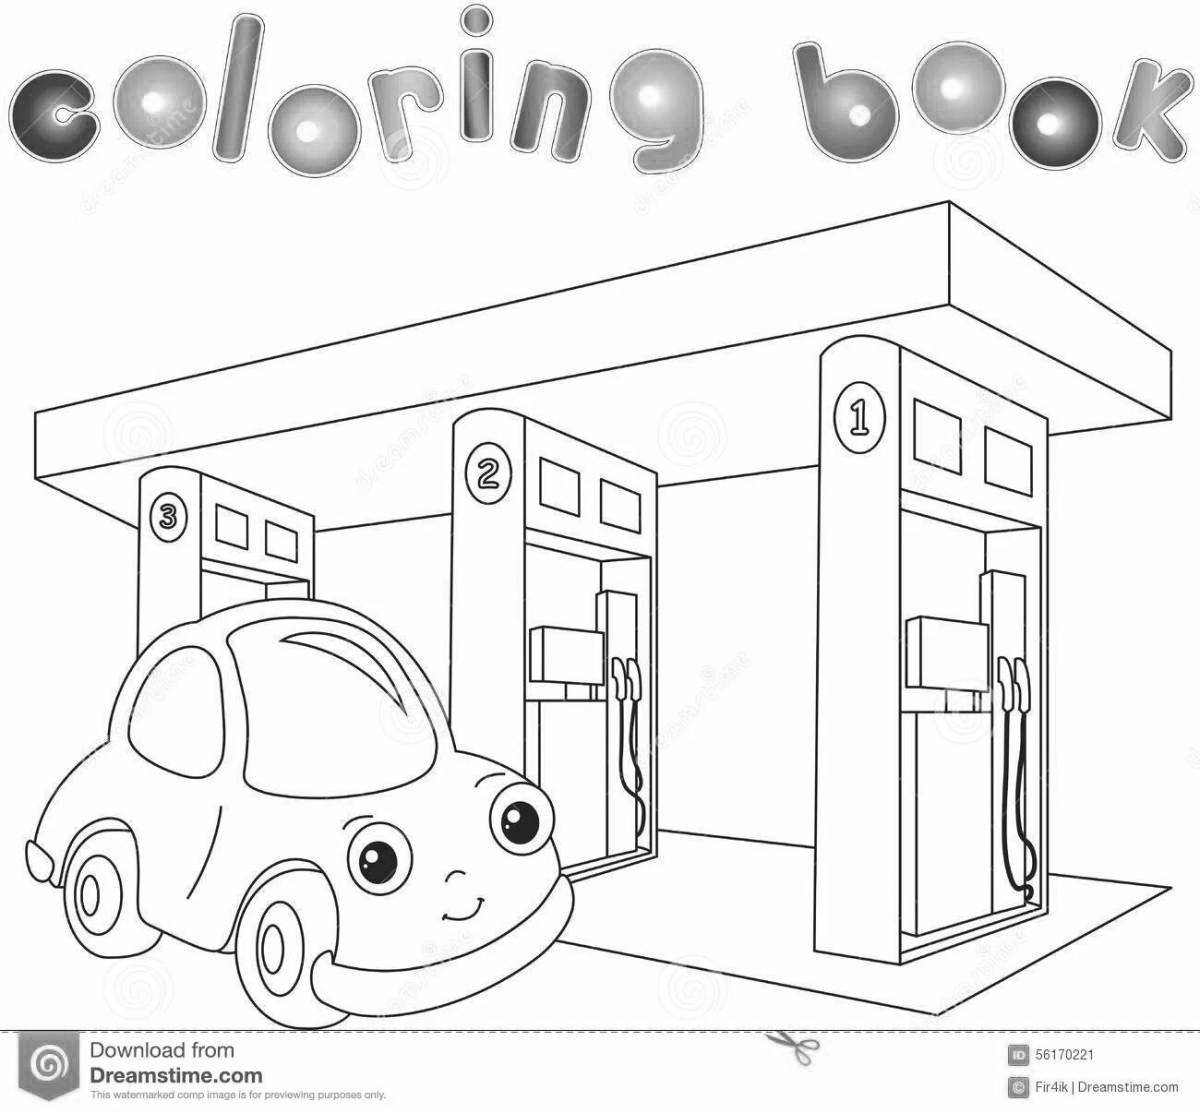 Coloring page amazing magical garage